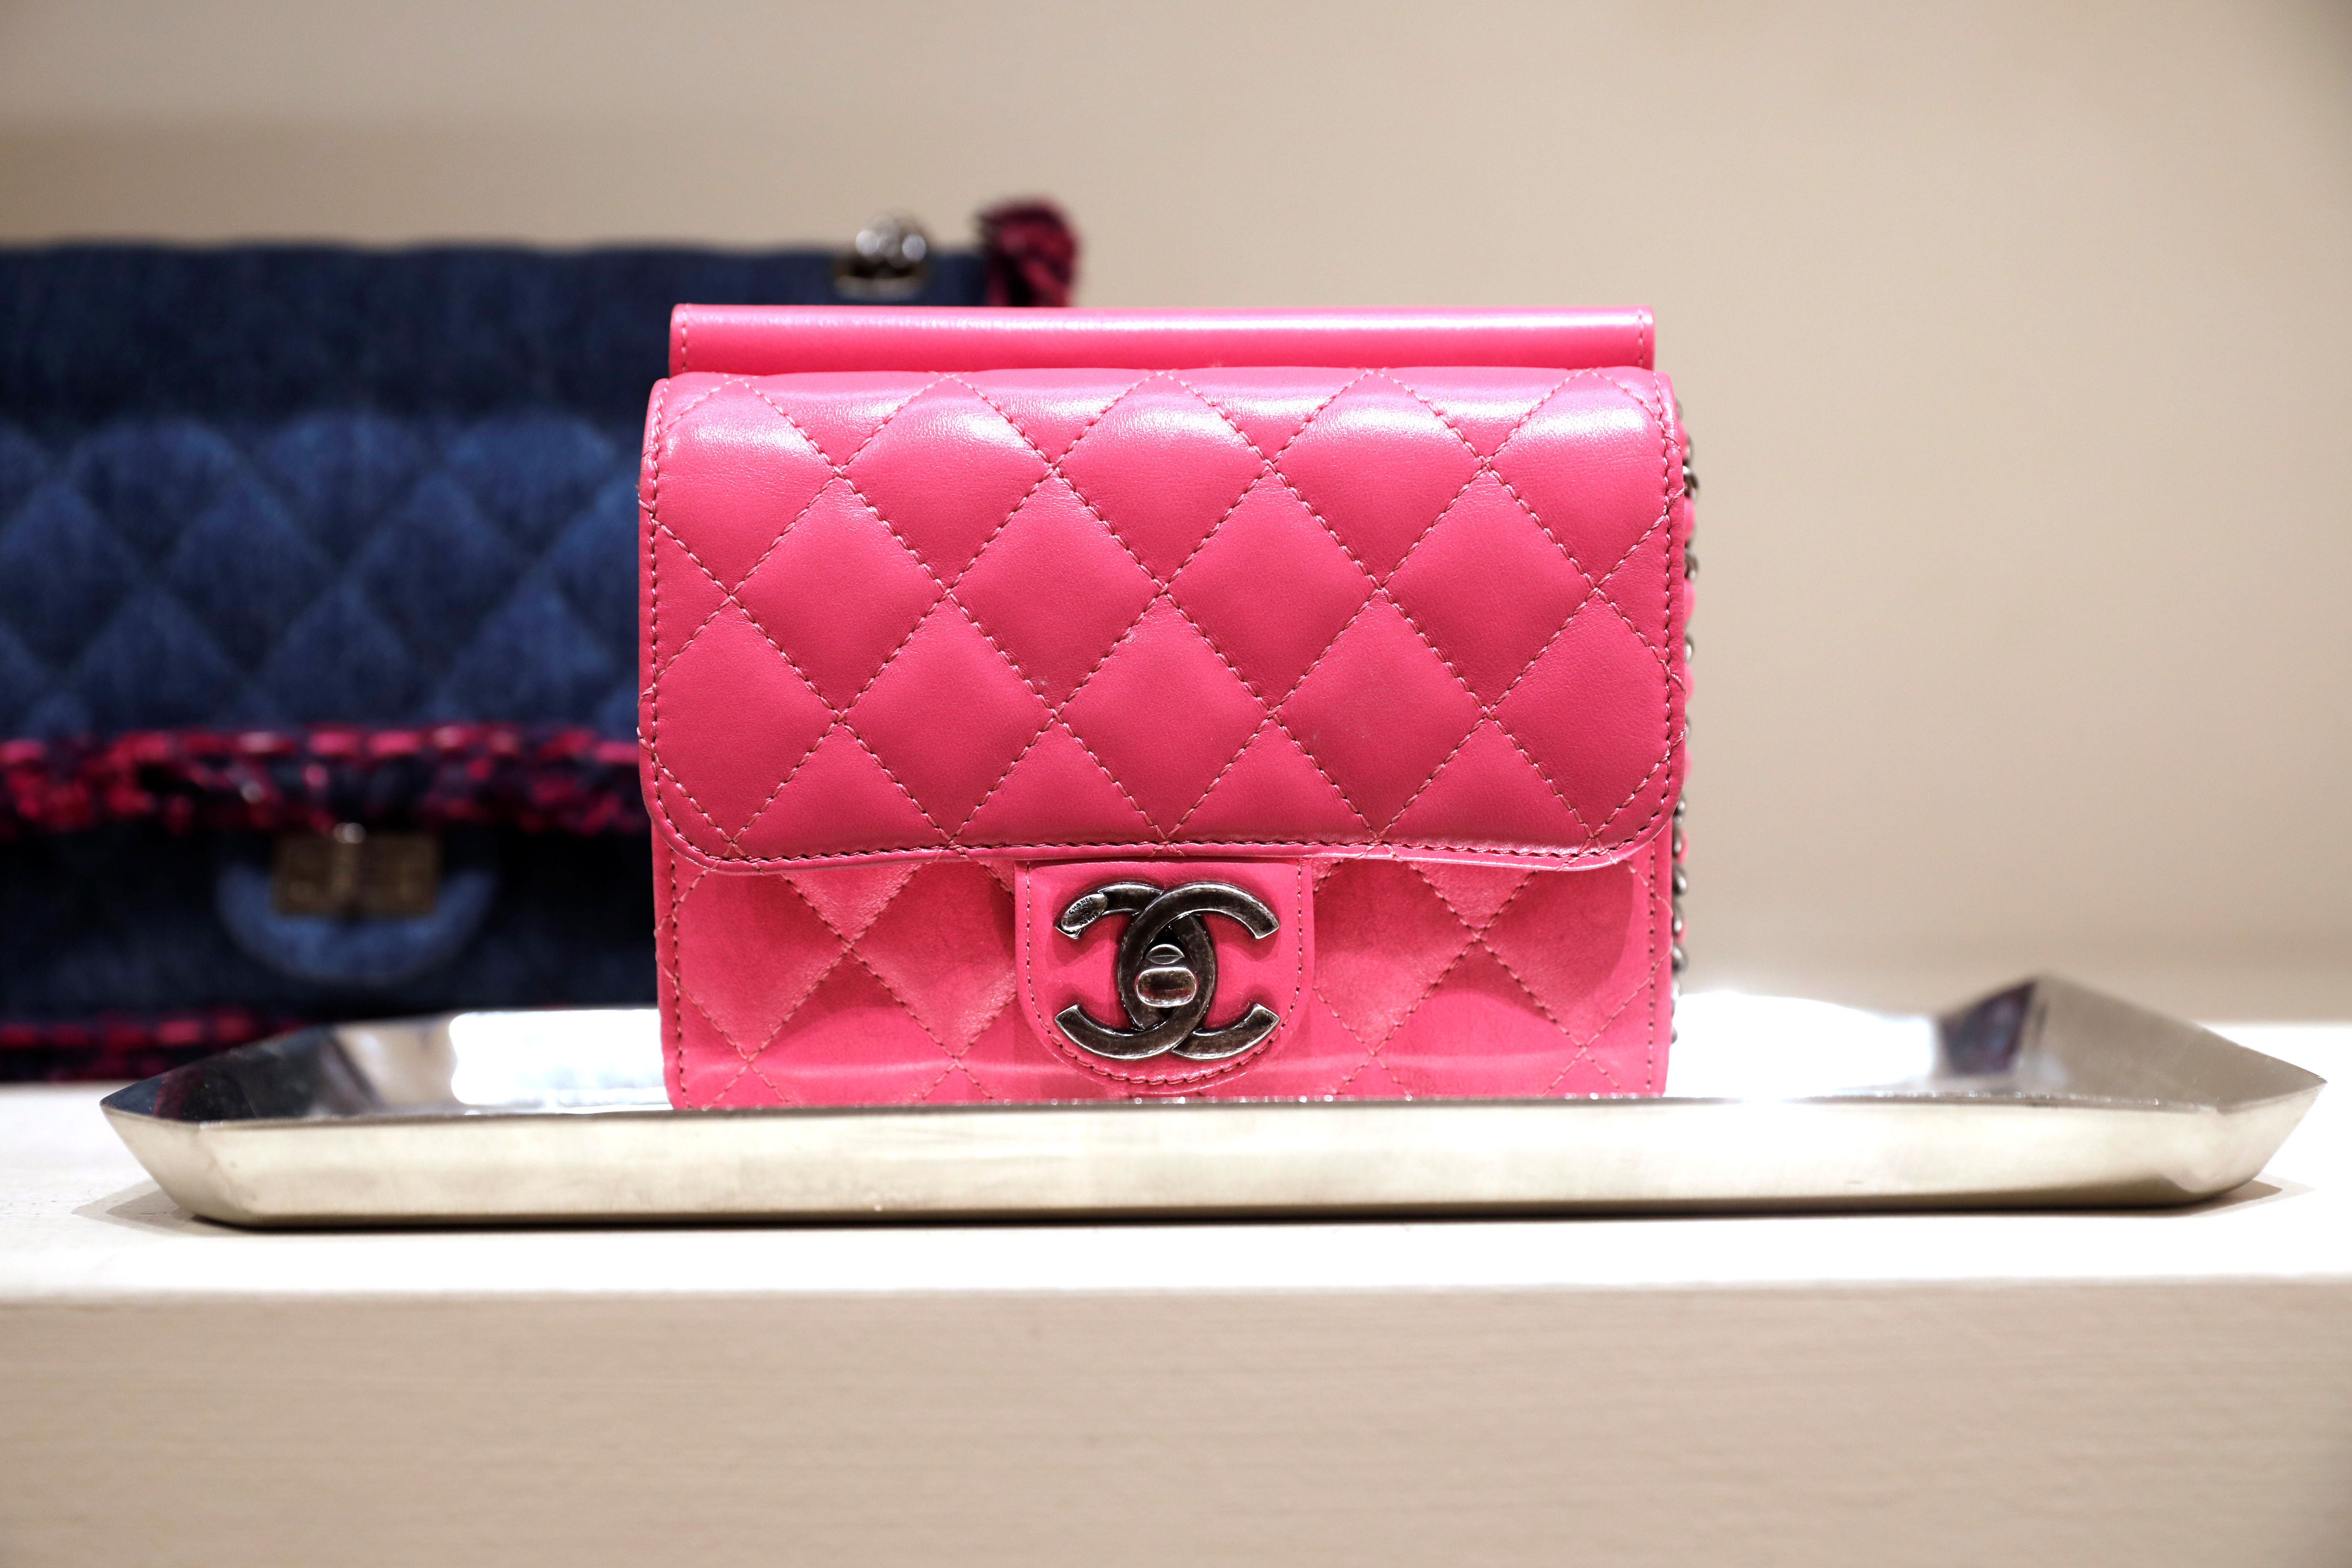 Chanel's $10,000 Handbags May Become Even Pricier in September - Bloomberg